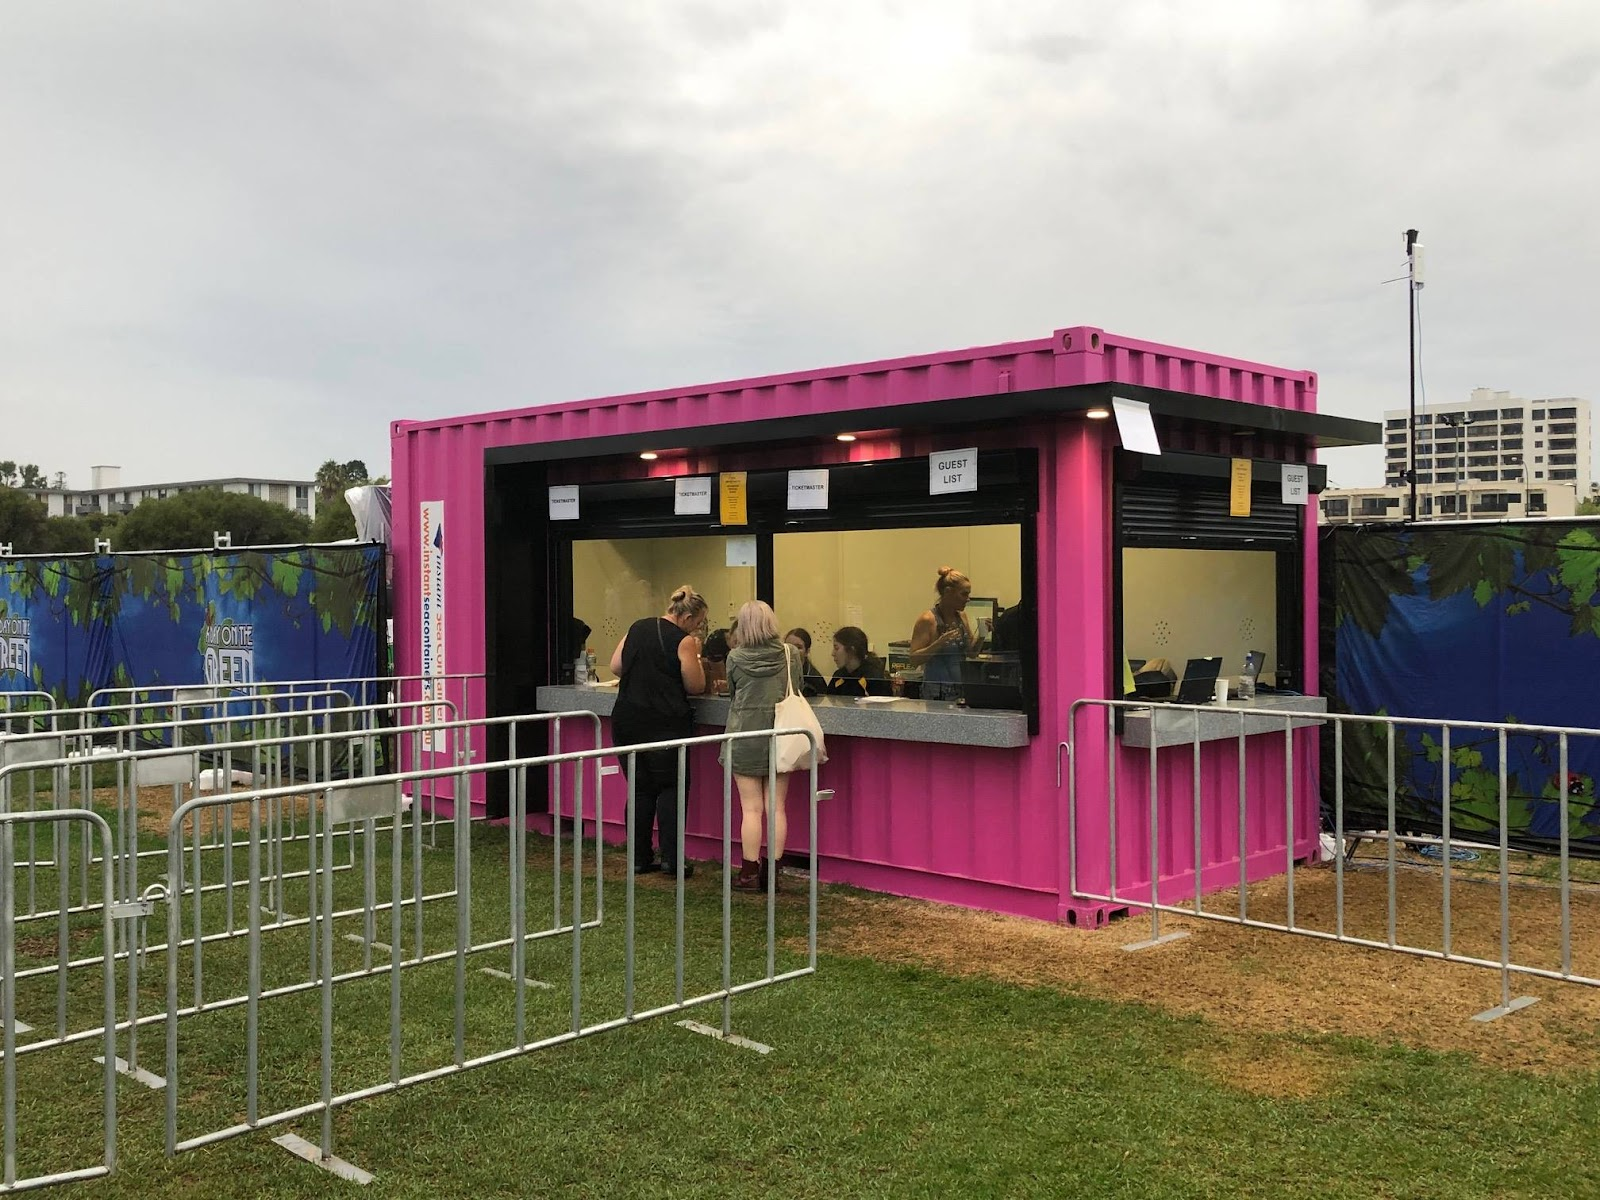 Bright pink shipping container converted into an outdoor event ticket booth.